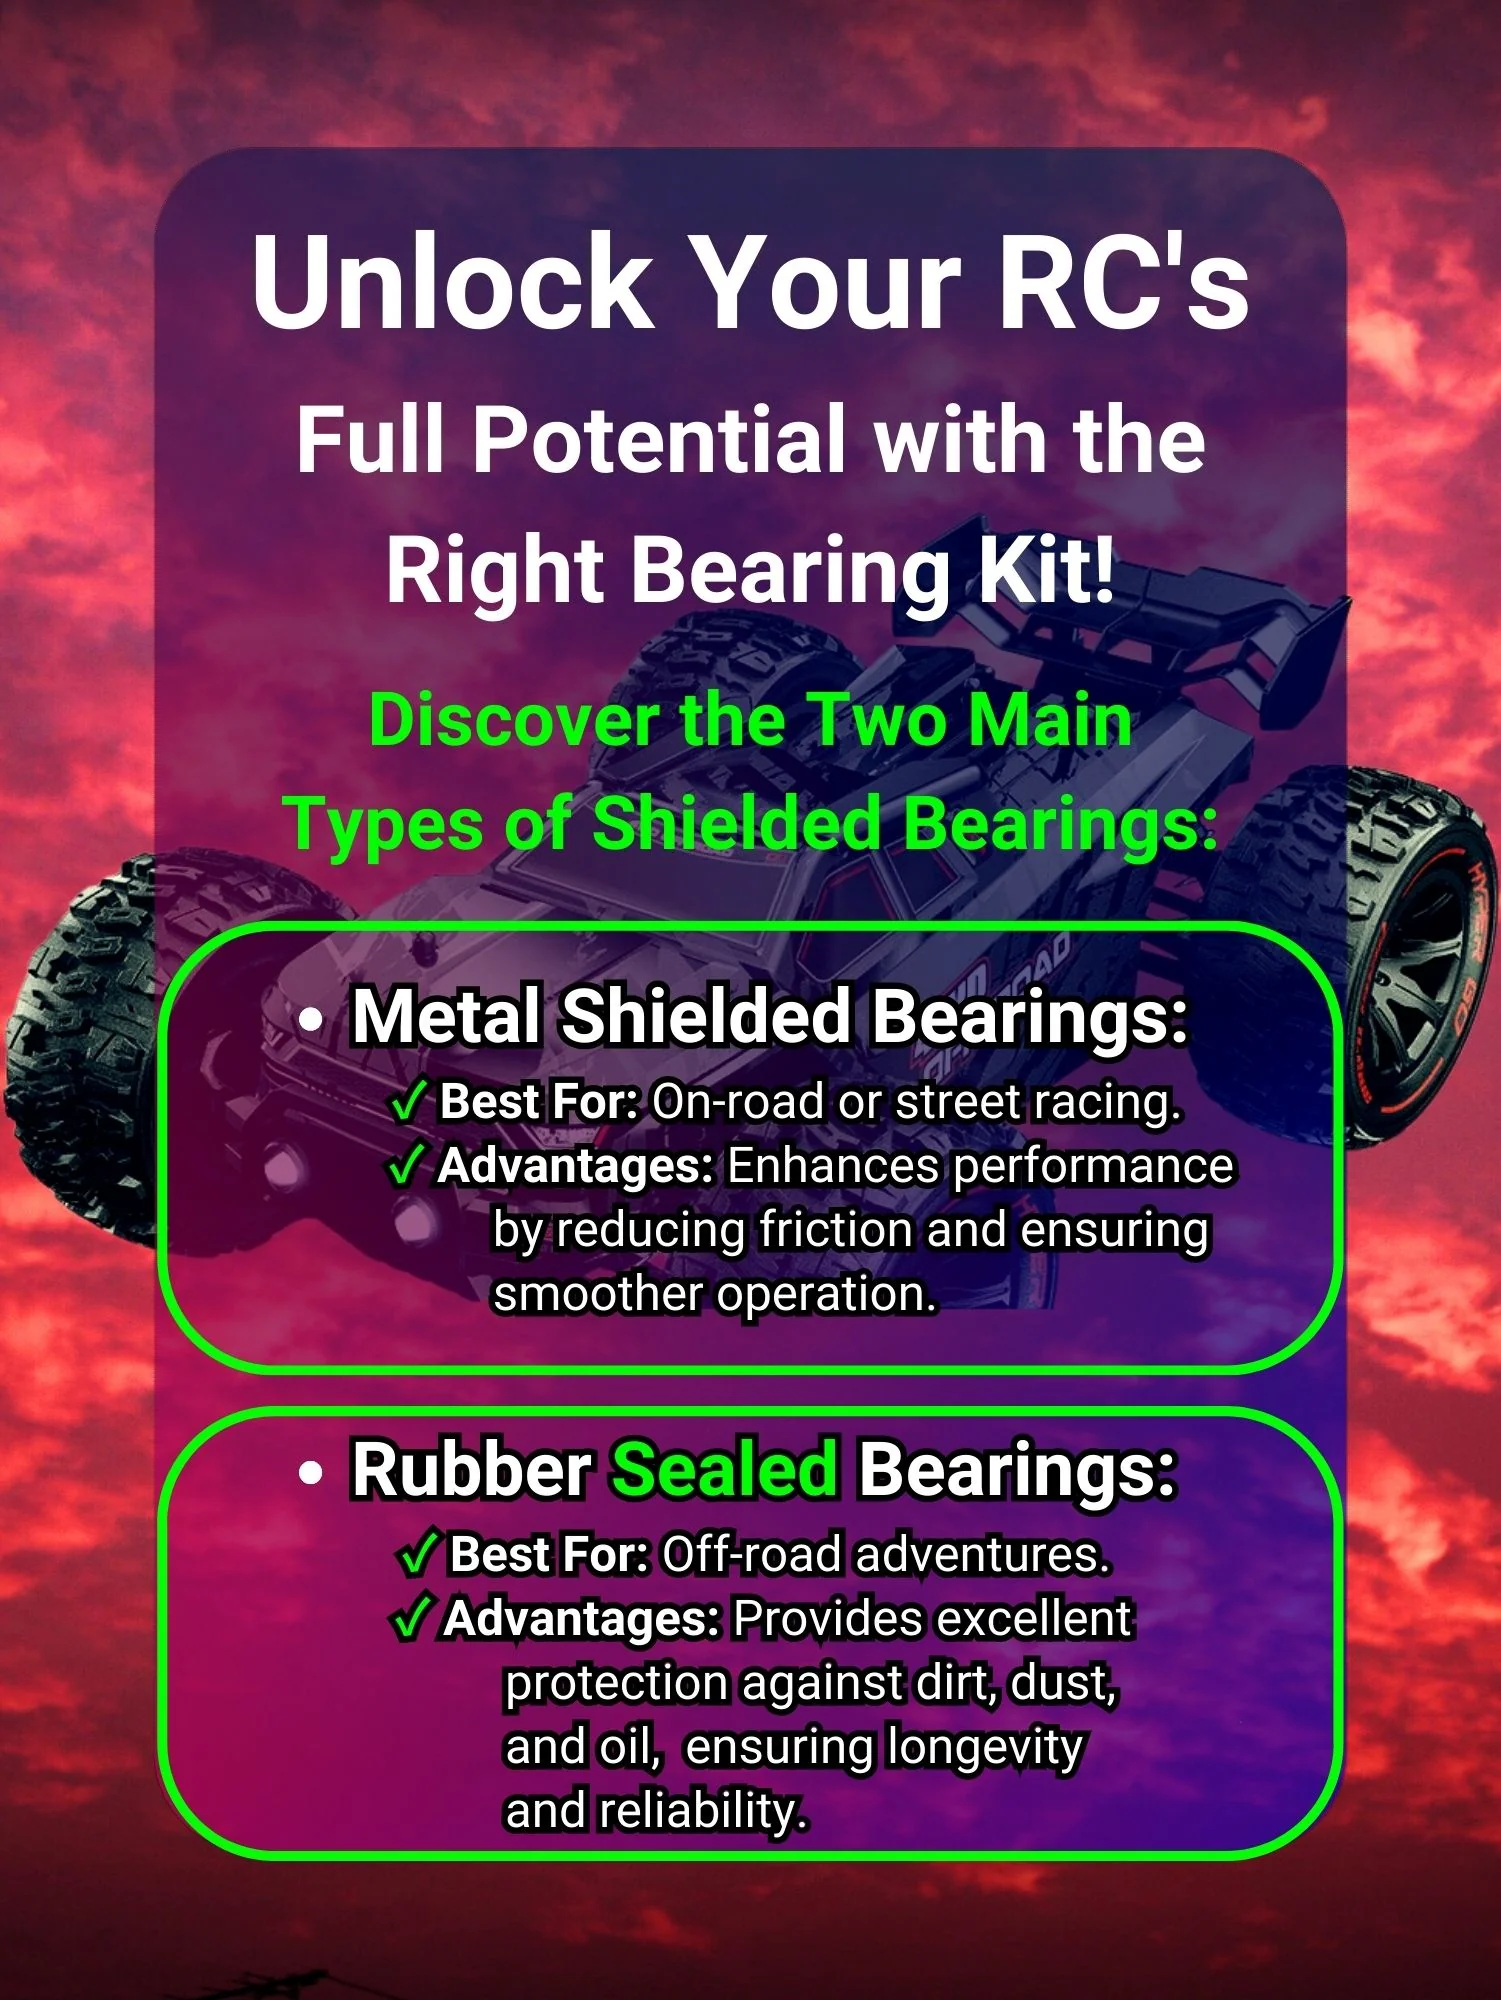 RCScrewZ Rubber Shielded Bearings asc130r for Associated CR12 Tioga Trail RTR - Picture 2 of 12